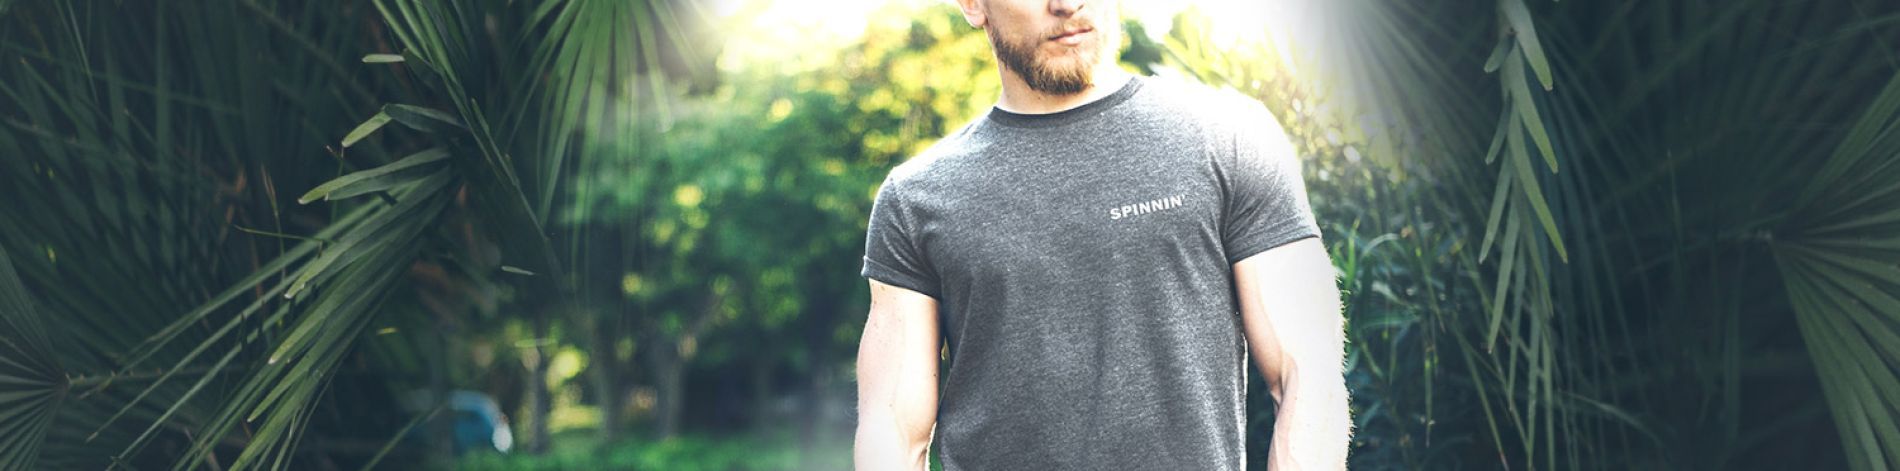 Receive 10% discount on a grey Spinnin' tee!